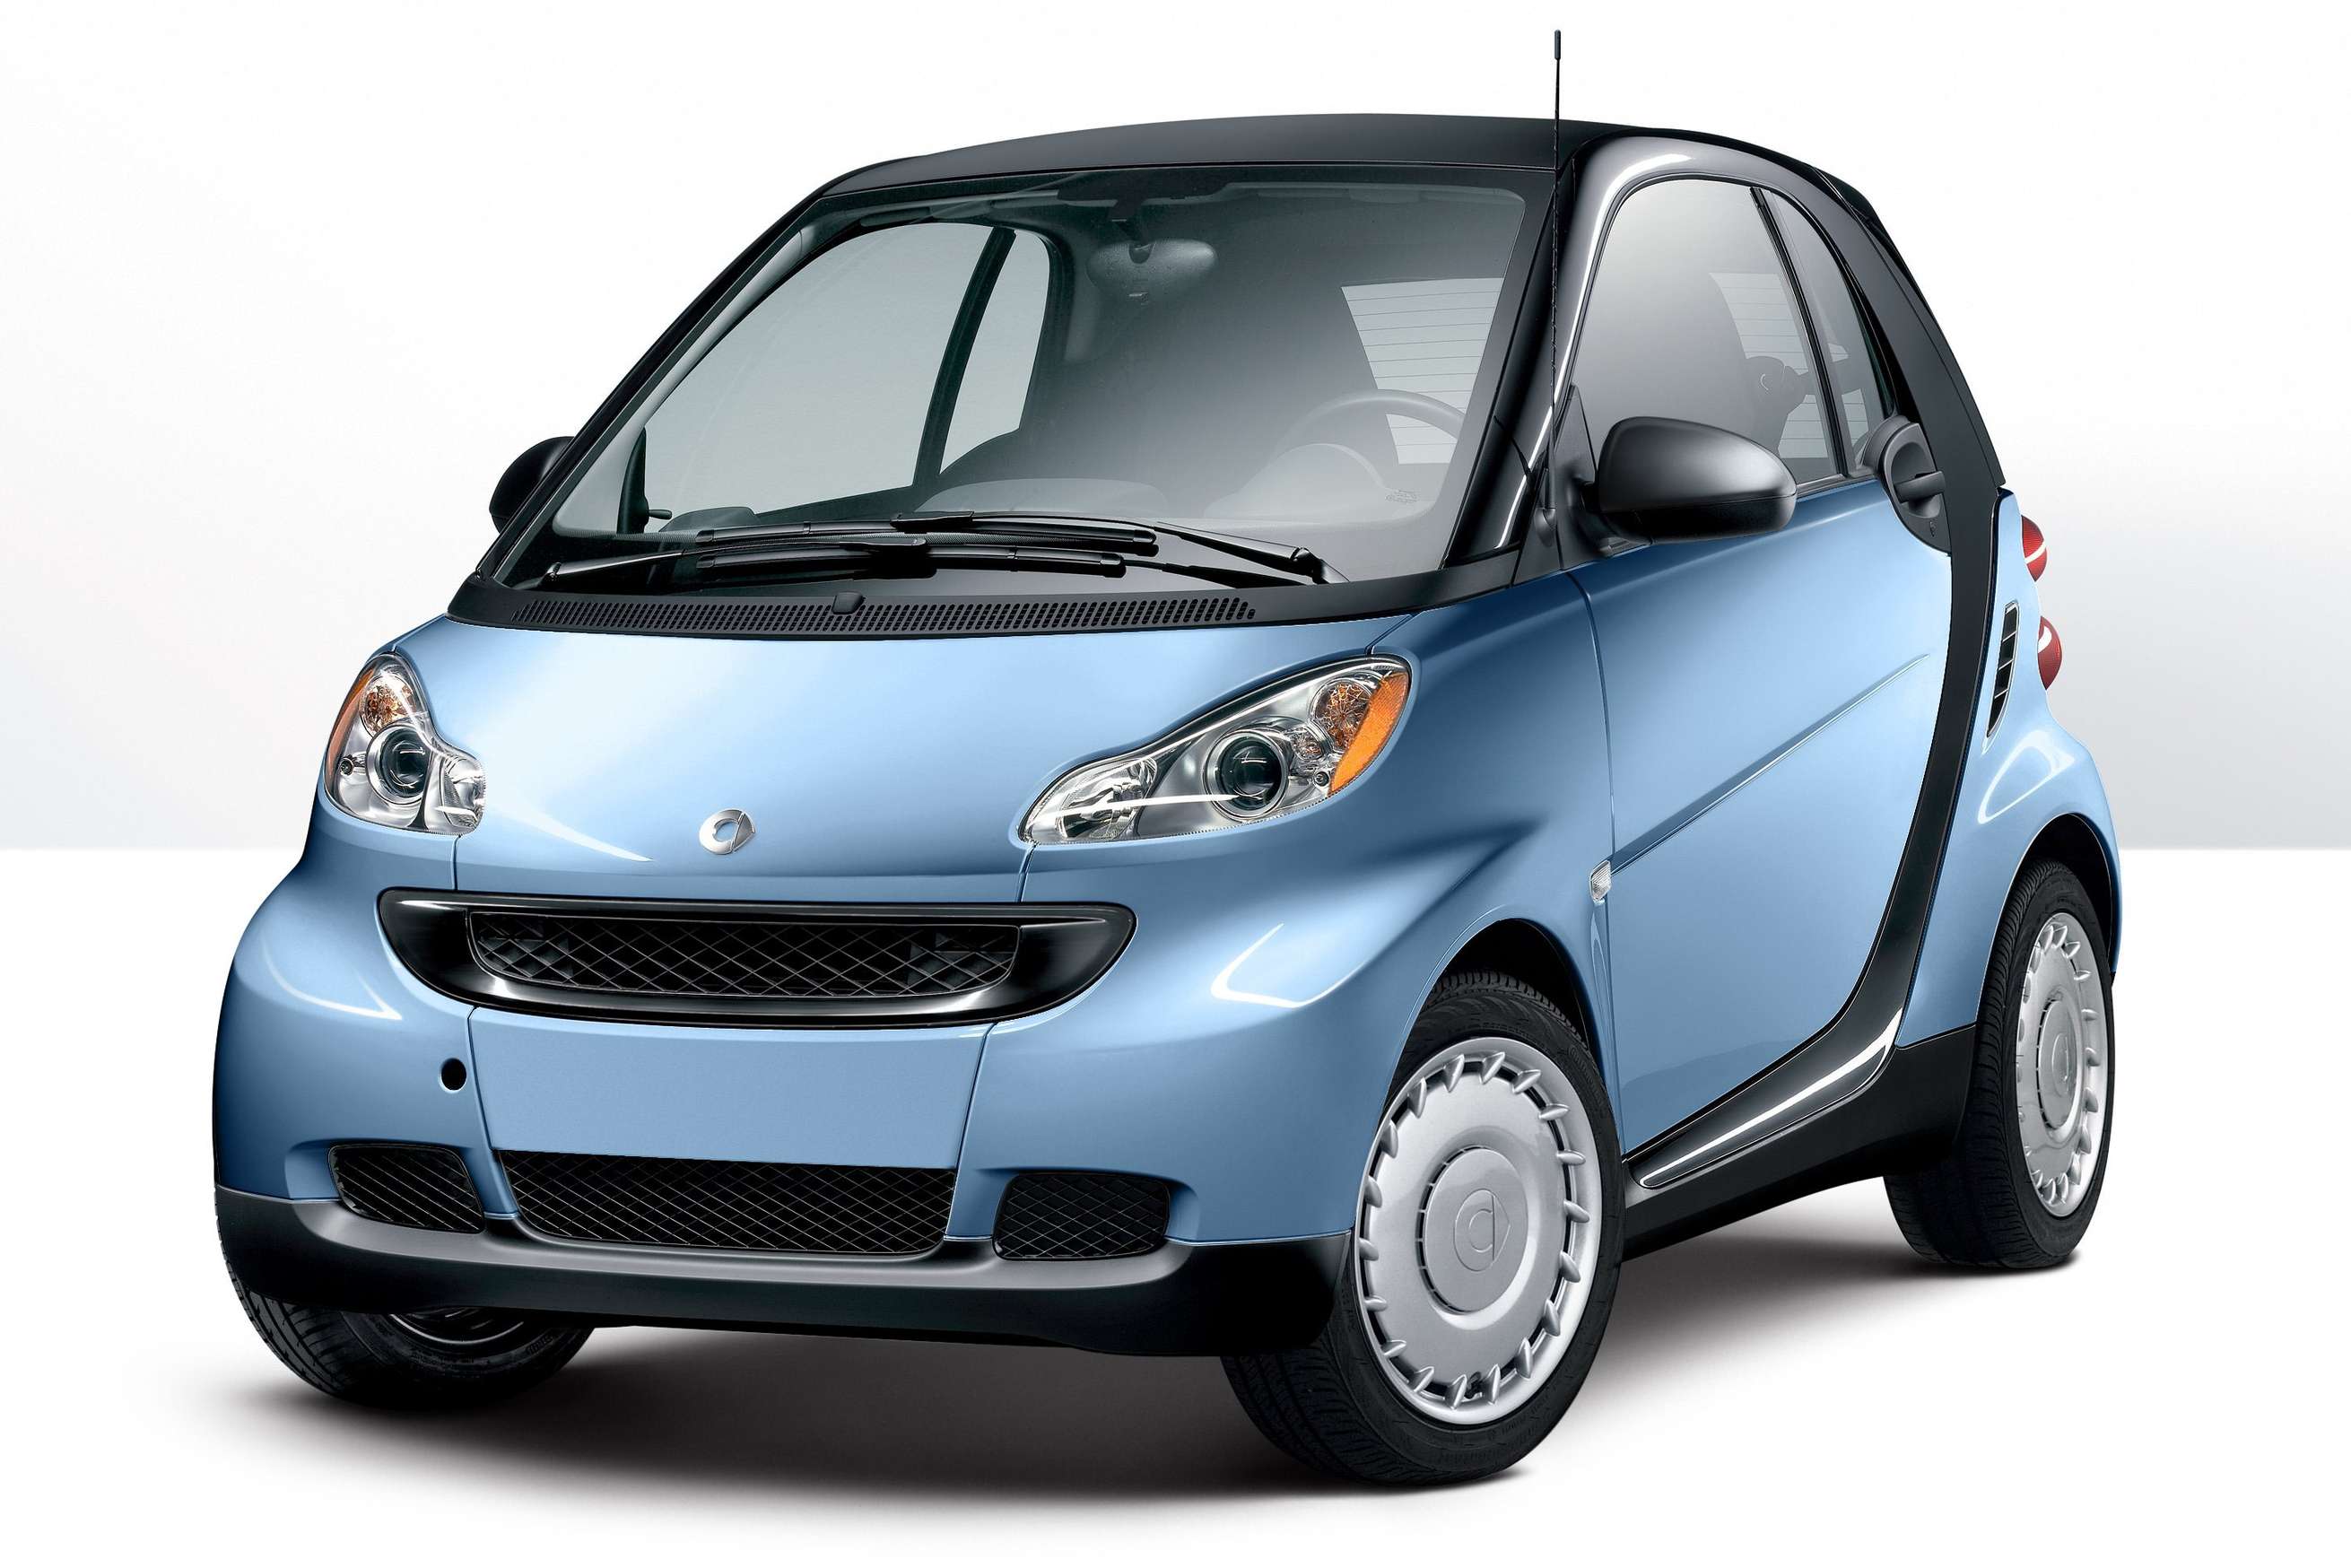 smart_Fortwo